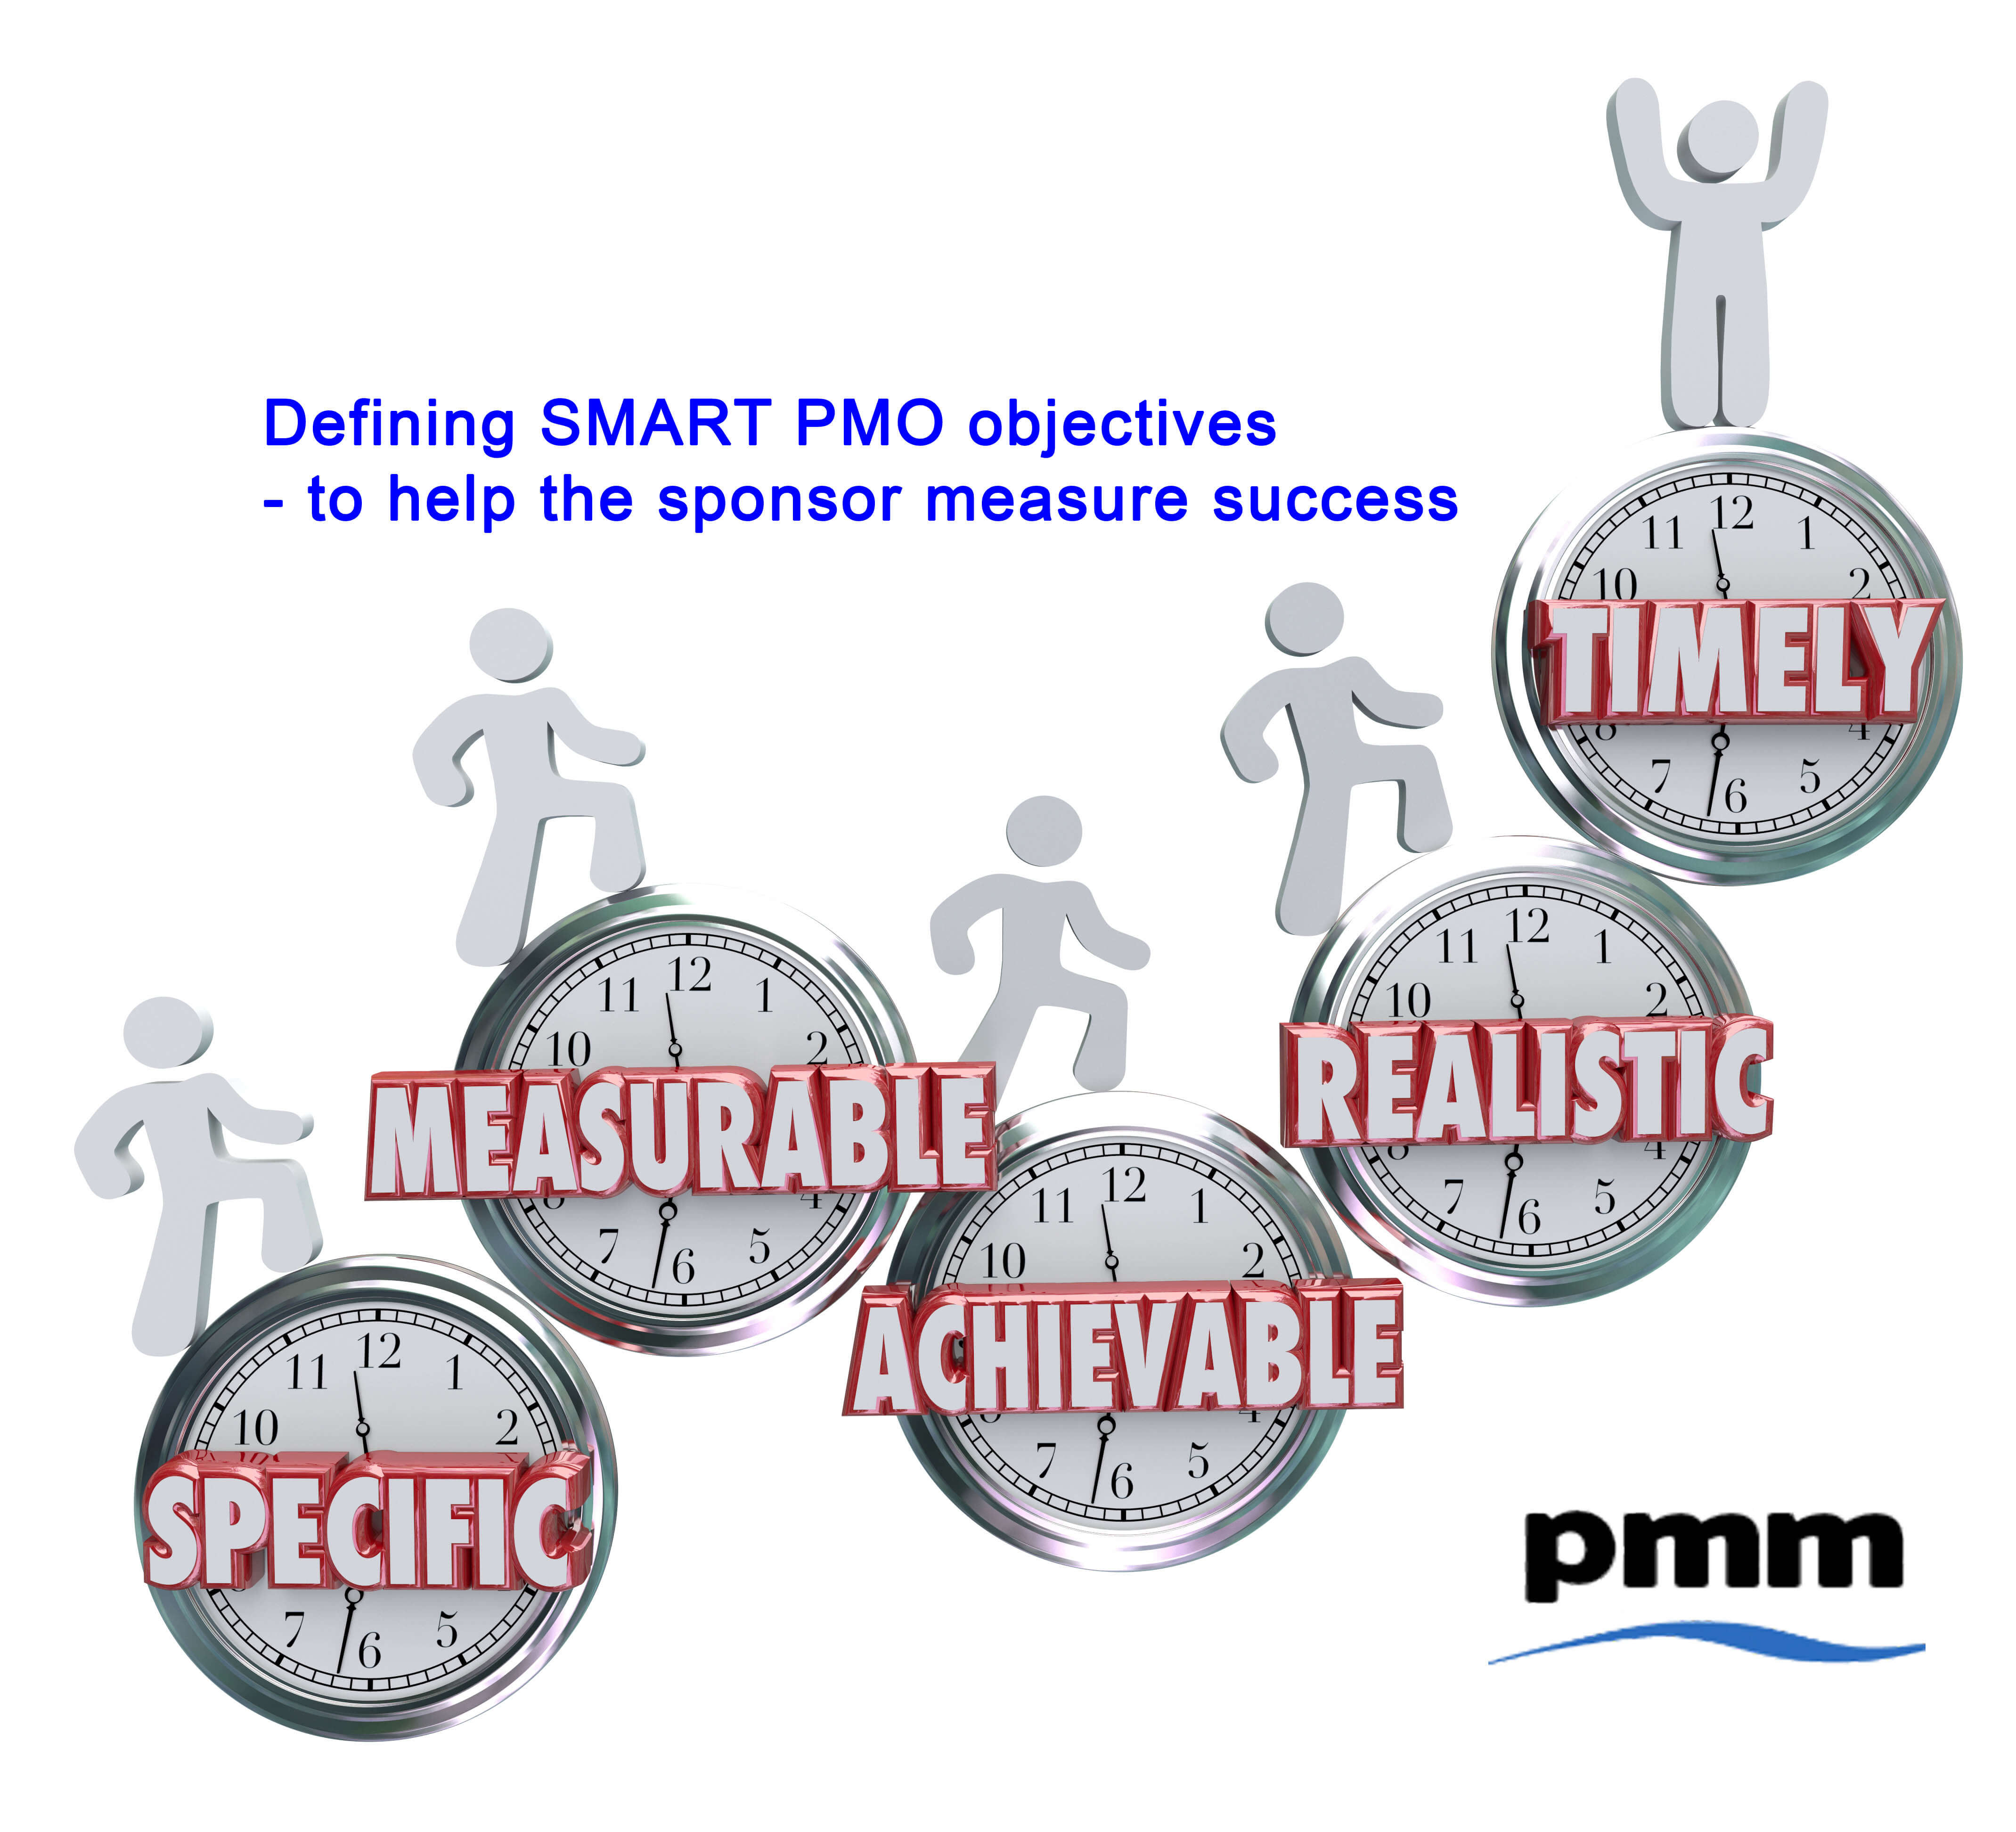 Defining objectives for a PMO to help the sponsor measure success